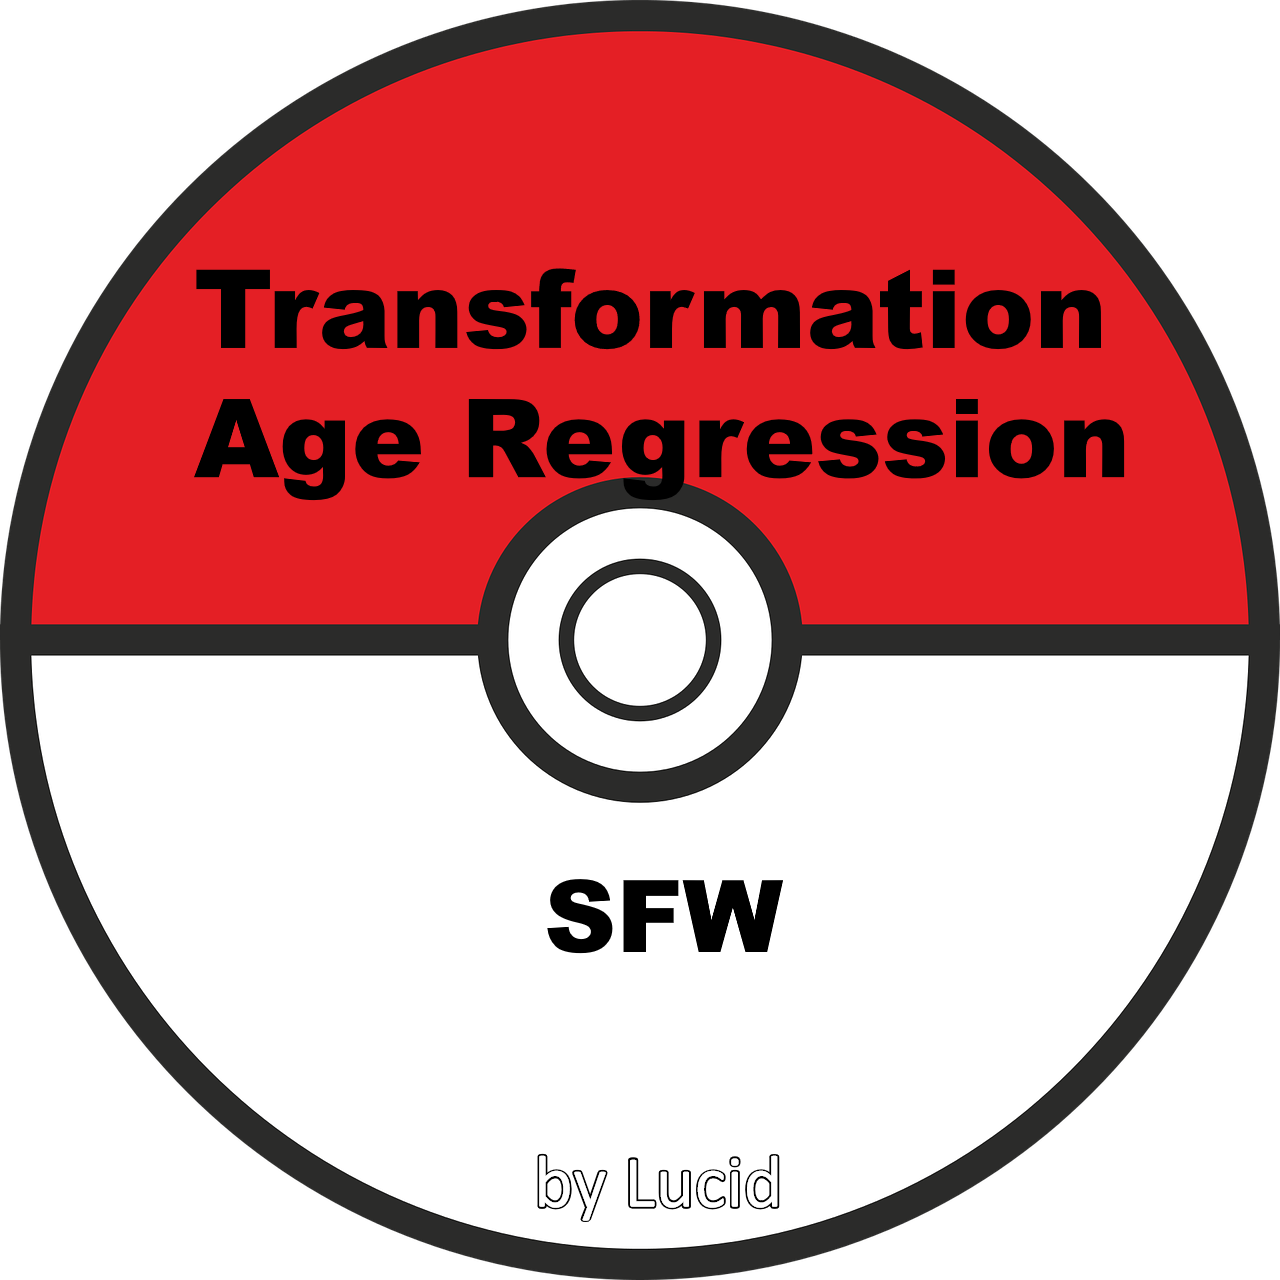 Red and white pokeball background; Transformation and Age Regression; SFW; by Lucid